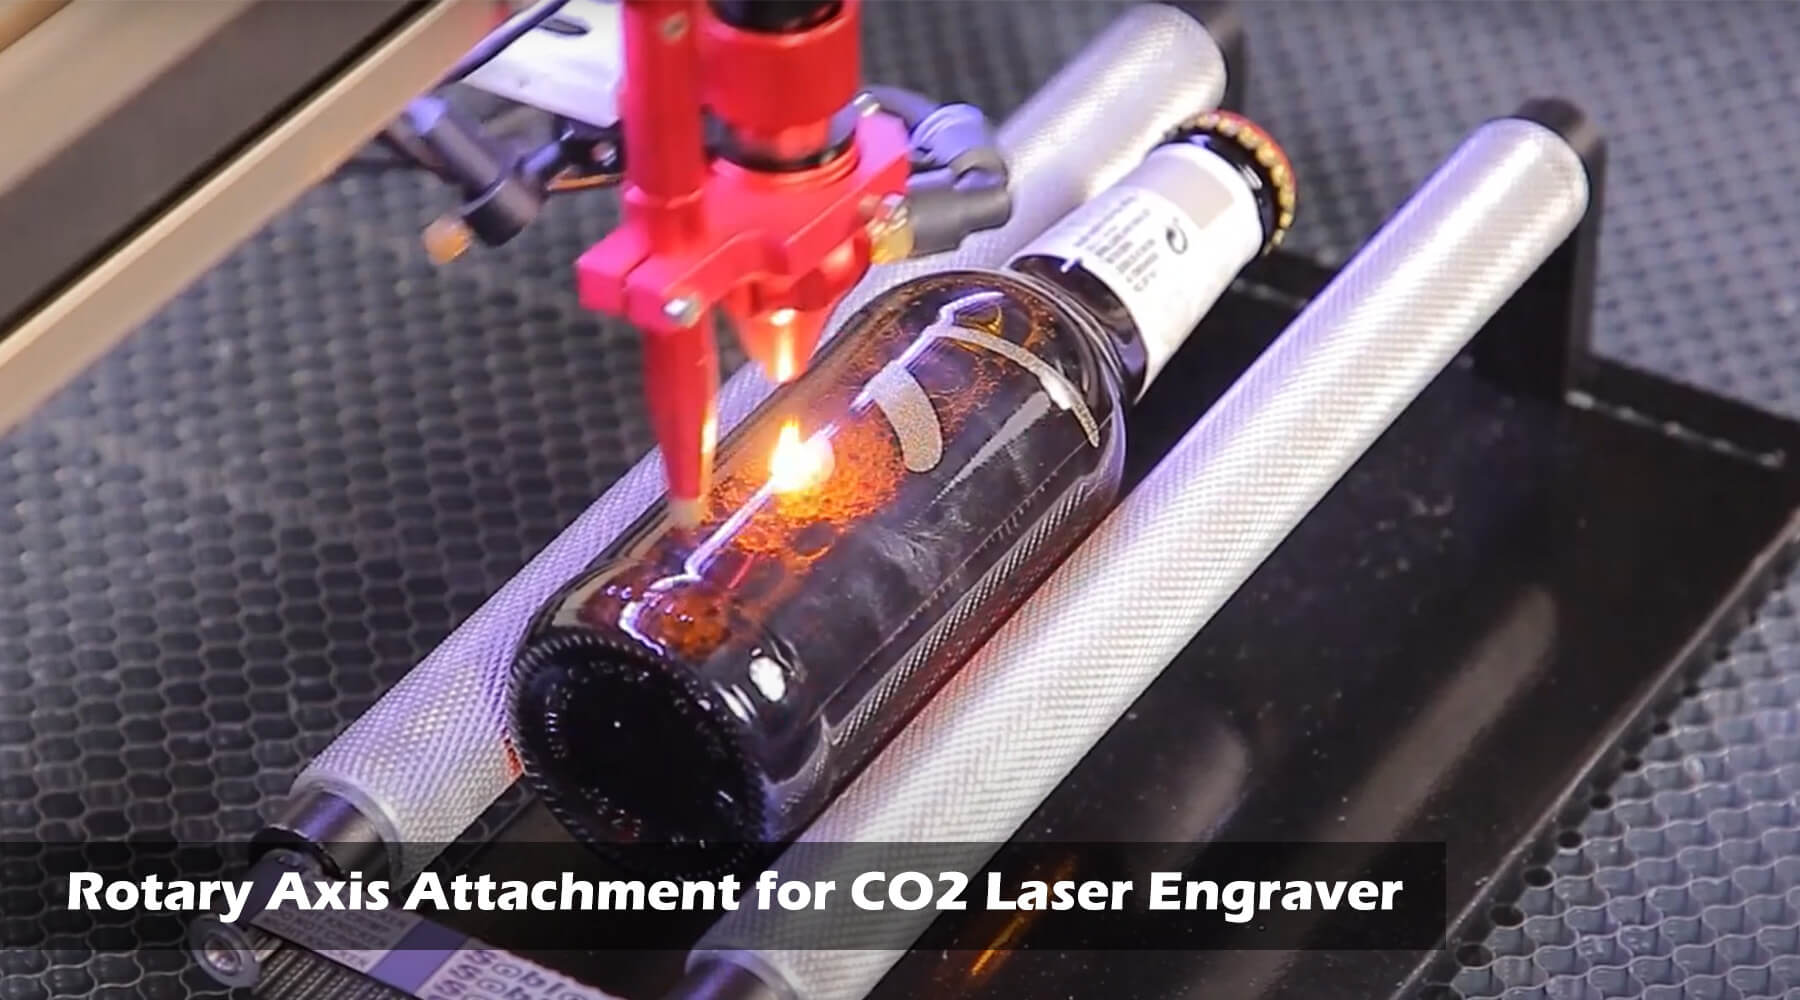 Rotary Axis Attachment for CO2 Laser Engraver